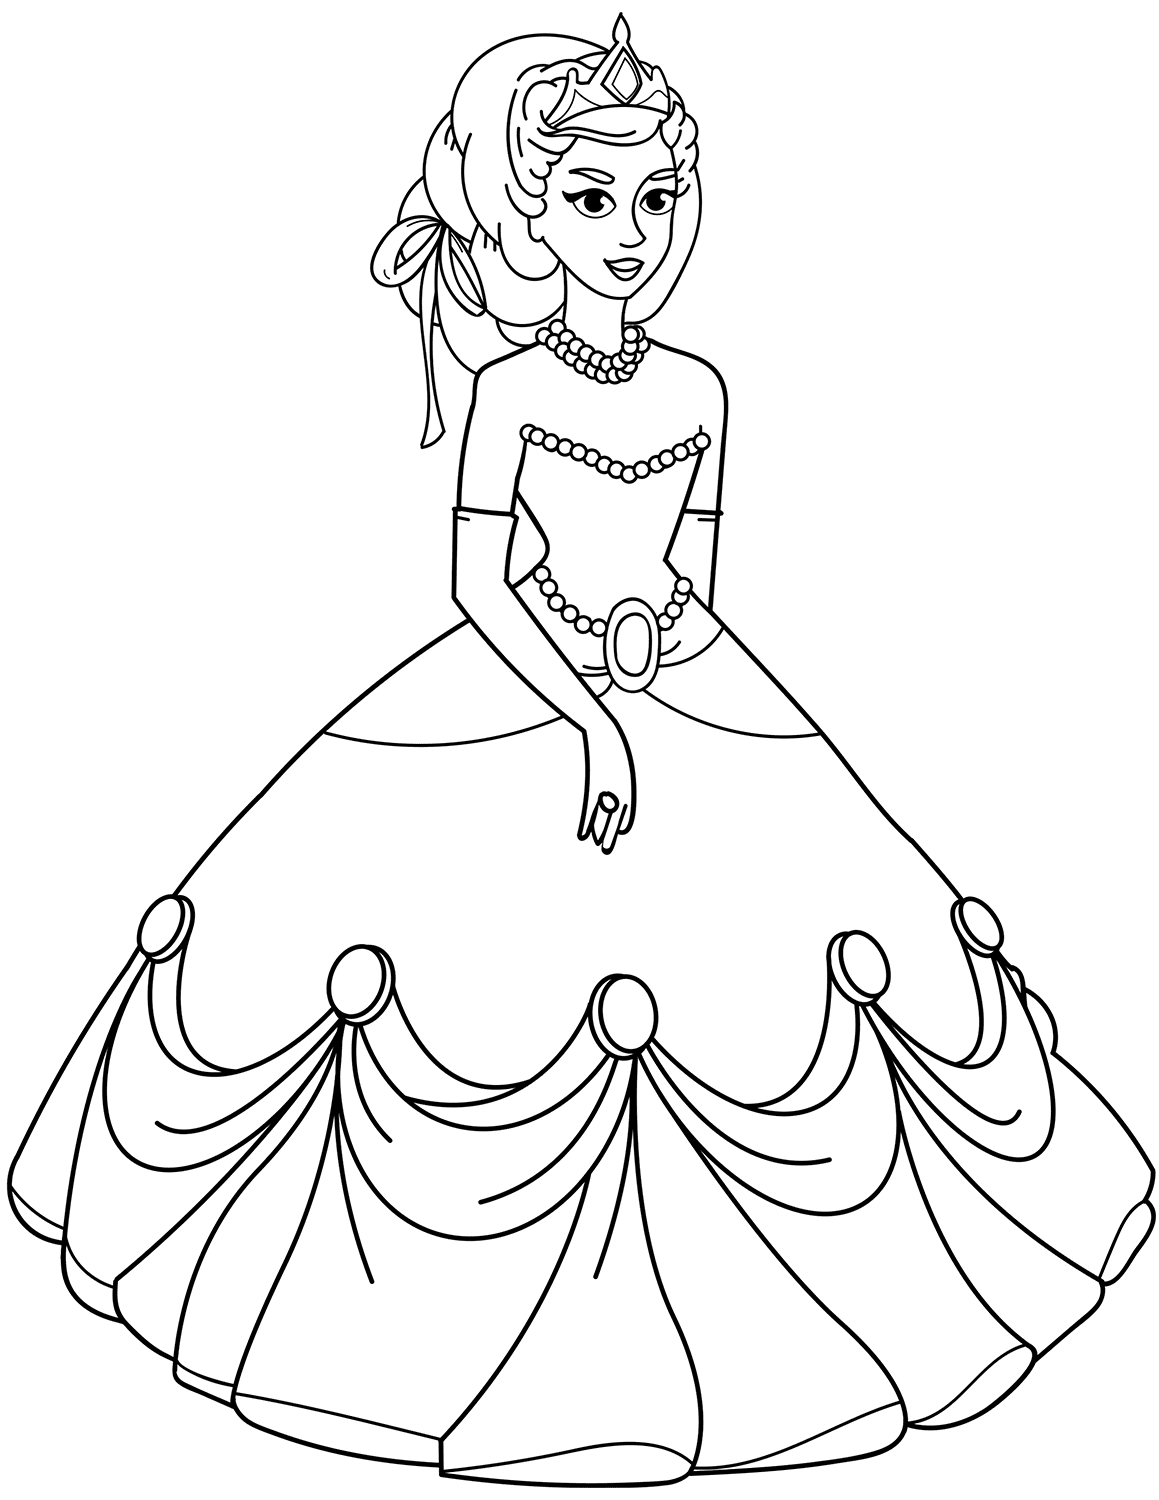 Princess In Ball Gown Dress Coloring Page